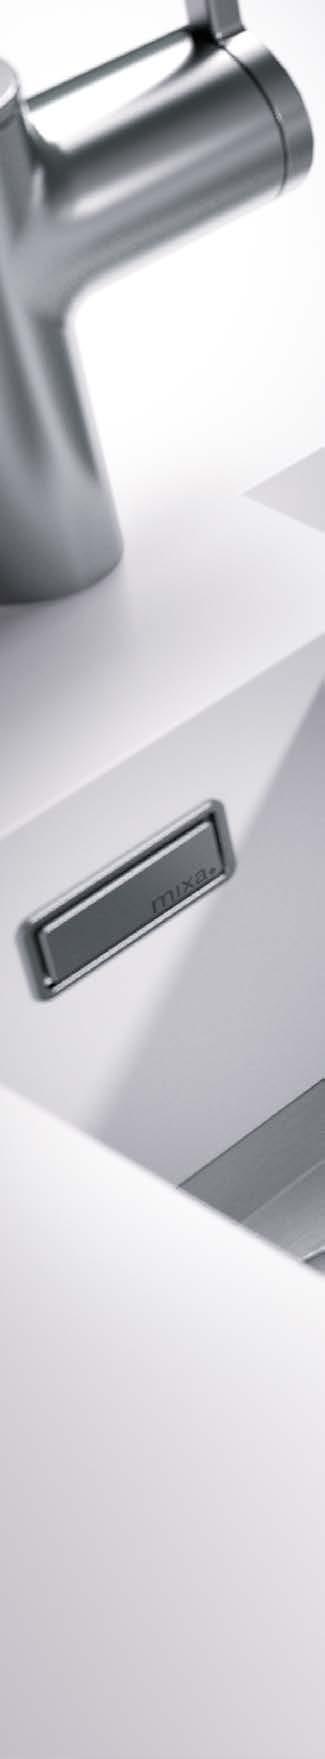 MIXA R0 The Minimalist MIXA R0 sinks are the ideal solution for an ultra modern finish.